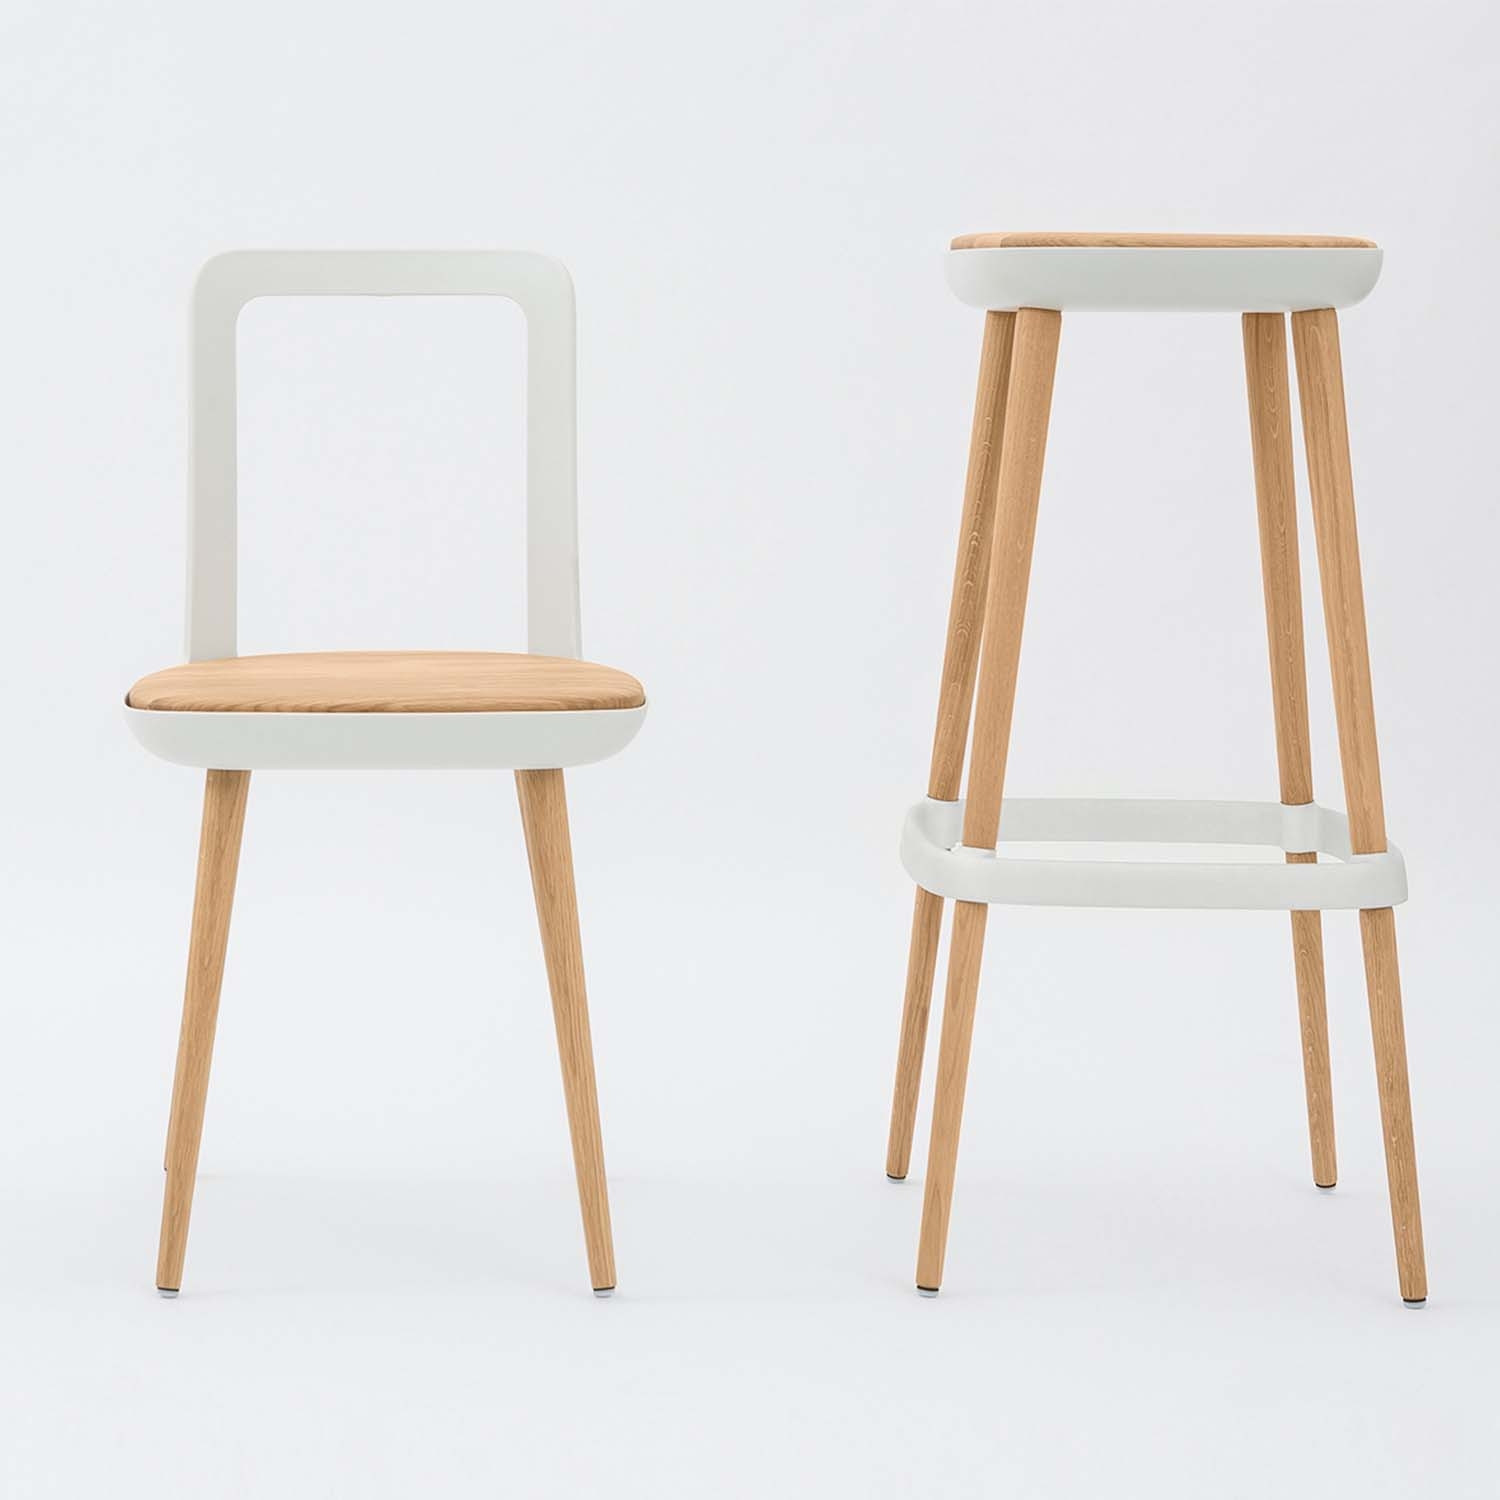 W-2020 Stool and Chair